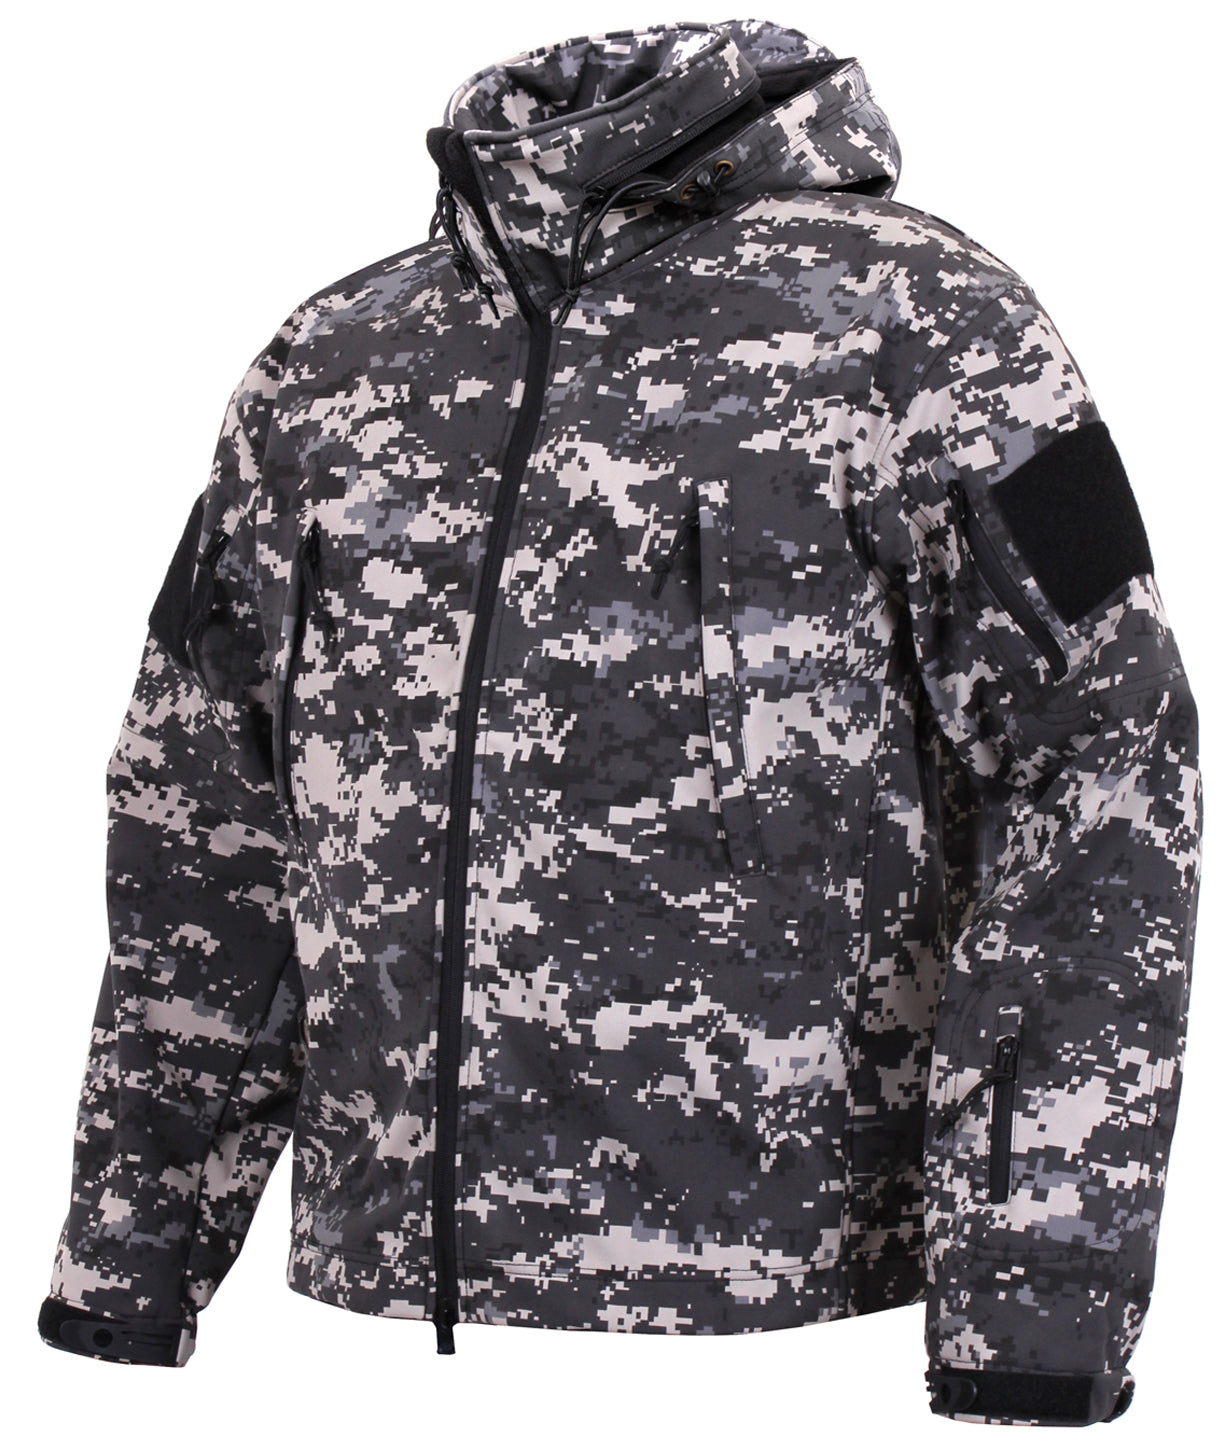 Milspec Special Ops Tactical Soft Shell Jacket Gifts For Him MilTac Tactical Military Outdoor Gear Australia